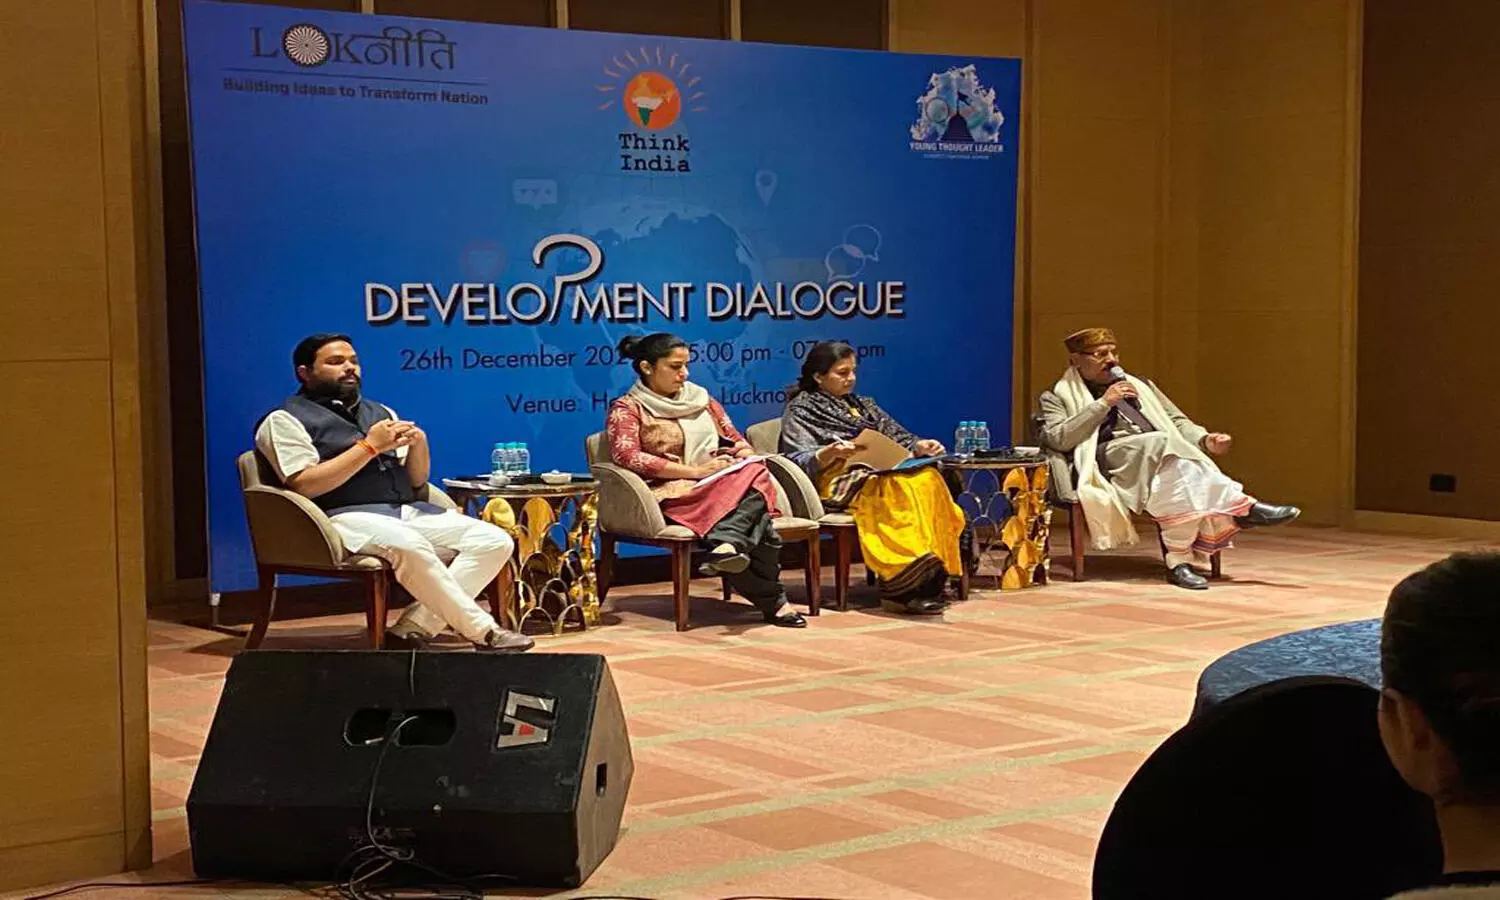 UP Young Thinkers Forum and LokNeeti India organises its first Development Dialogue